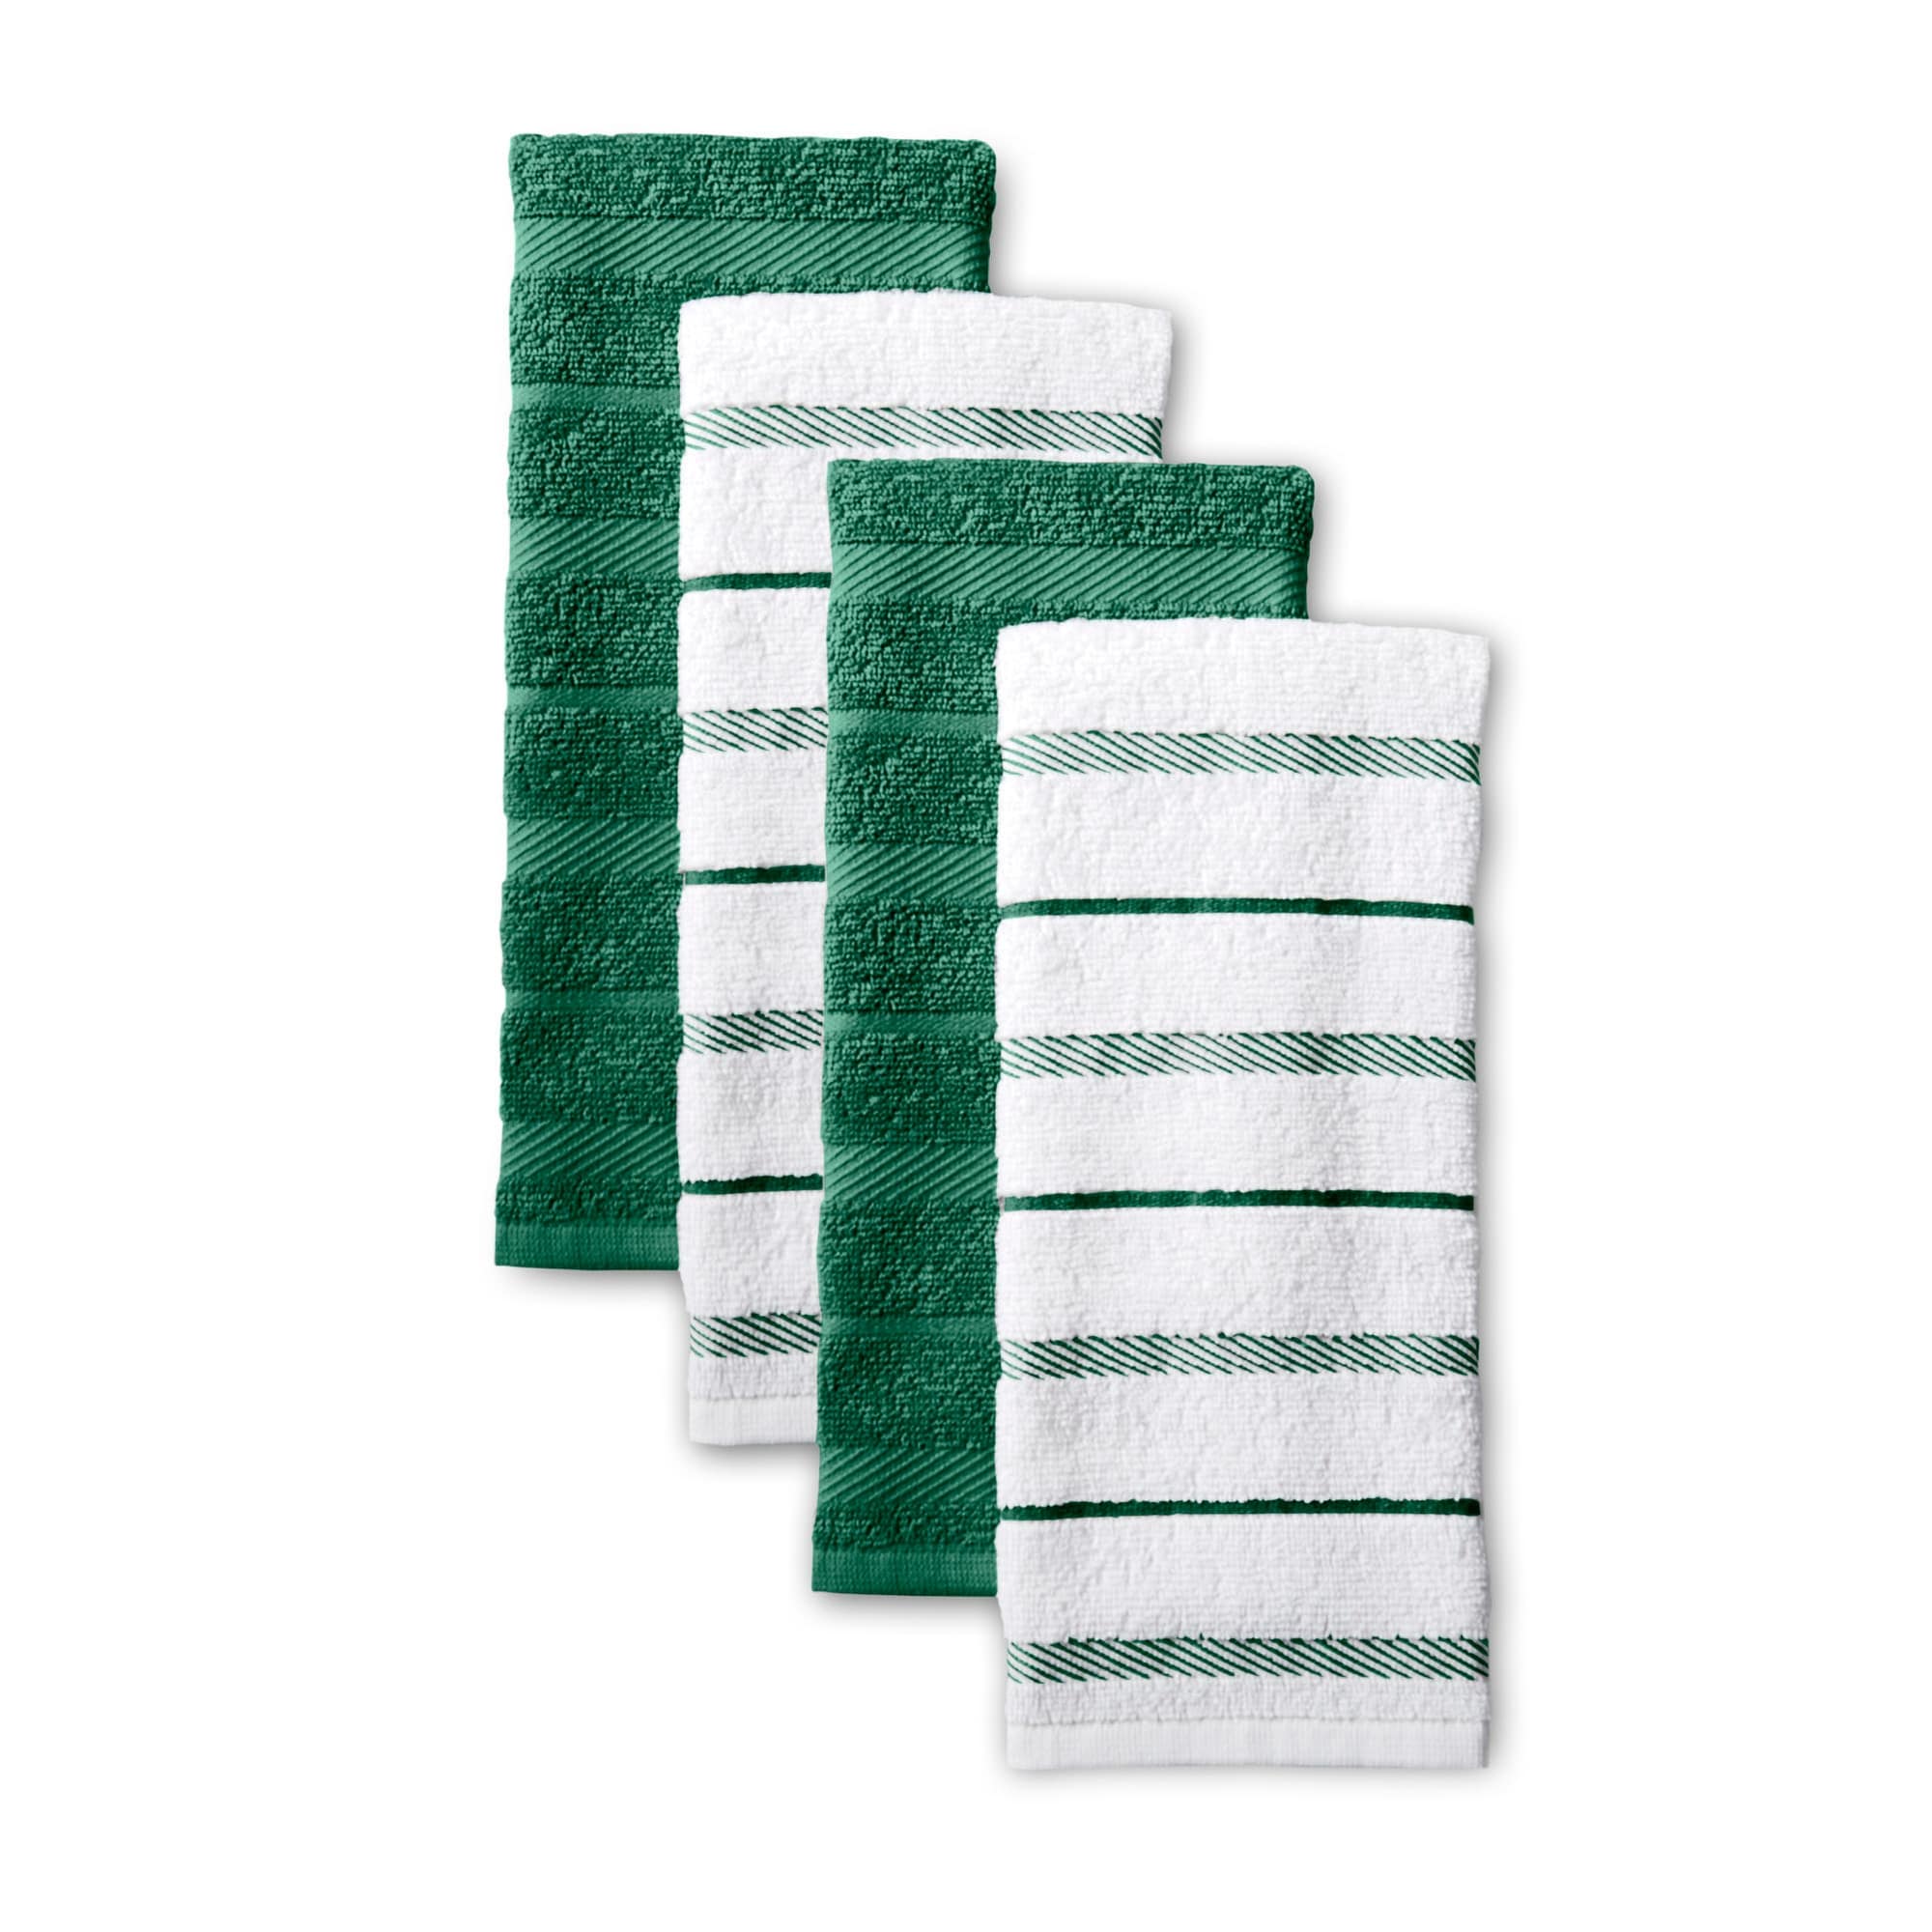 New KitchenAid Emerald Green Set of 6 Oven Mitts, Pot Holders, Towels